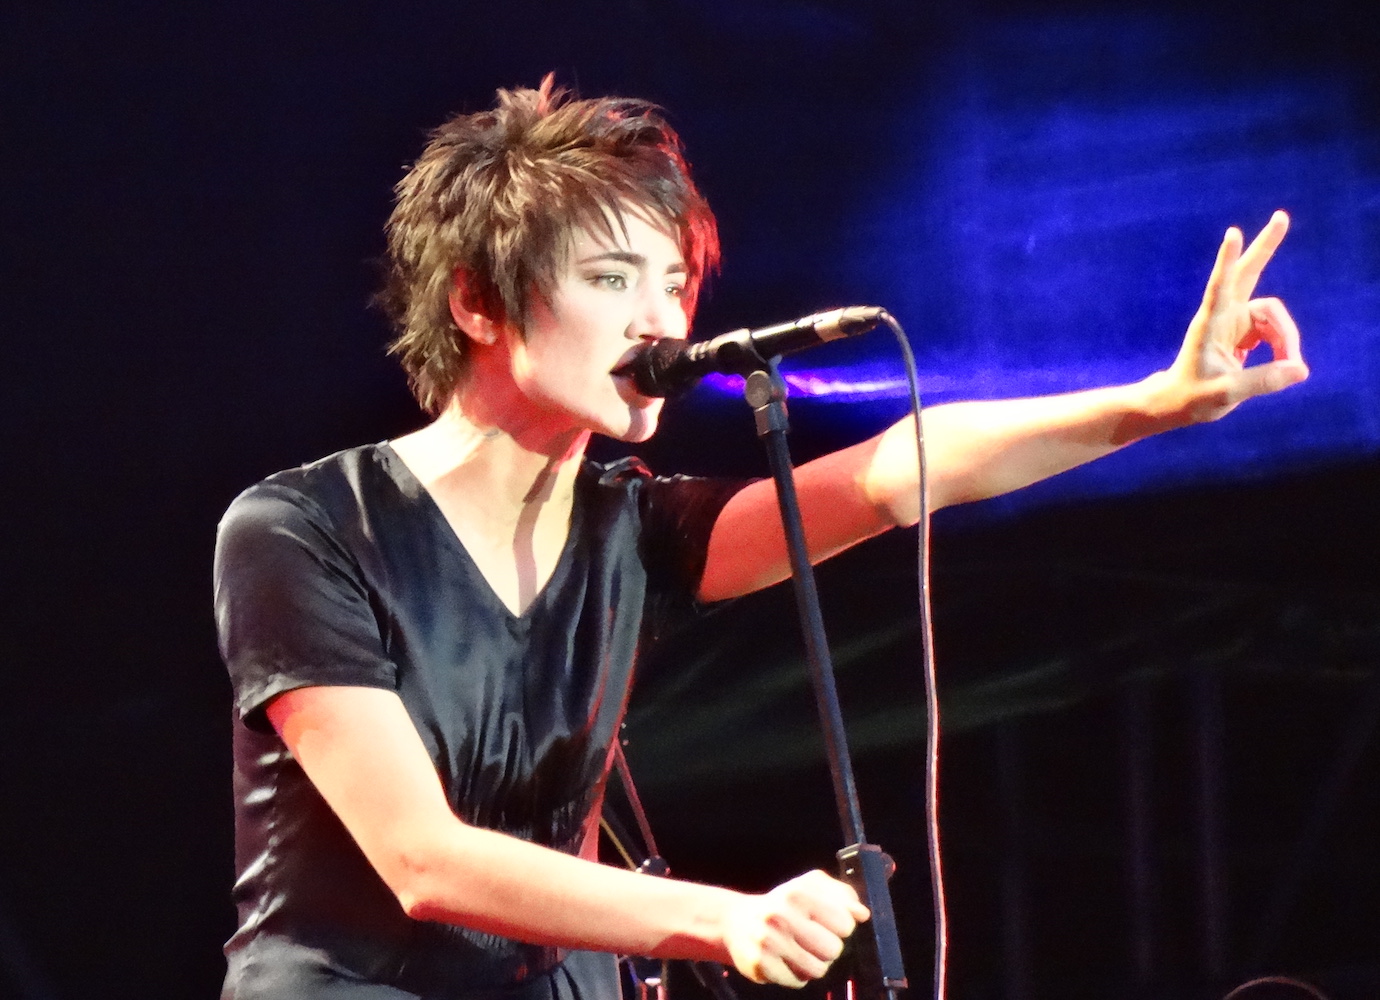 5 videos from Russian rock icon Zemfira you need to watch